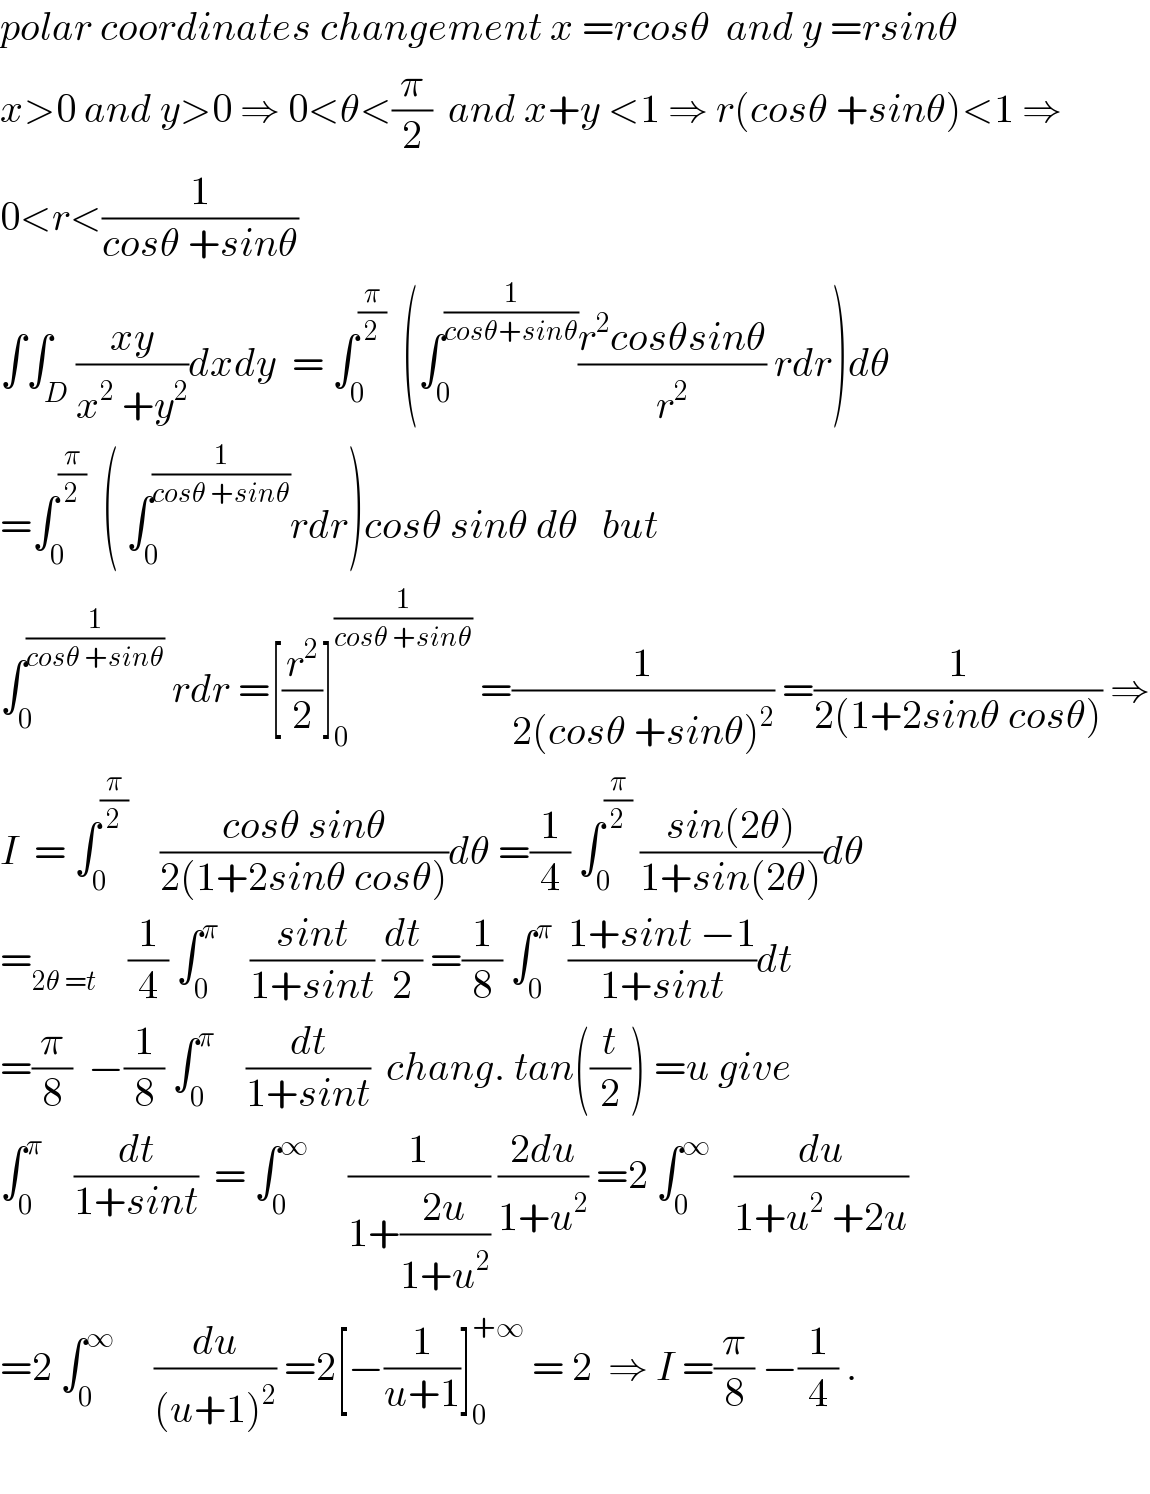 polar coordinates changement x =rcosθ  and y =rsinθ    x>0 and y>0 ⇒ 0<θ<(π/2)  and x+y <1 ⇒ r(cosθ +sinθ)<1 ⇒  0<r<(1/(cosθ +sinθ))  ∫∫_D ((xy)/(x^2  +y^2 ))dxdy  = ∫_0 ^(π/2)   (∫_0 ^(1/(cosθ+sinθ)) ((r^2 cosθsinθ)/r^2 ) rdr)dθ  =∫_0 ^(π/2)   ( ∫_0 ^(1/(cosθ +sinθ)) rdr)cosθ sinθ dθ   but  ∫_0 ^(1/(cosθ +sinθ))  rdr =[(r^2 /2)]_0 ^(1/(cosθ +sinθ))  =(1/(2(cosθ +sinθ)^2 )) =(1/(2(1+2sinθ cosθ))) ⇒  I  = ∫_0 ^(π/2)     ((cosθ sinθ)/(2(1+2sinθ cosθ)))dθ =(1/4) ∫_0 ^(π/2)  ((sin(2θ))/(1+sin(2θ)))dθ  =_(2θ =t)     (1/4) ∫_0 ^π     ((sint)/(1+sint)) (dt/2) =(1/8) ∫_0 ^π   ((1+sint −1)/(1+sint))dt  =(π/8)  −(1/8) ∫_0 ^π     (dt/(1+sint))  chang. tan((t/2)) =u give  ∫_0 ^π     (dt/(1+sint))  = ∫_0 ^∞      (1/(1+((2u)/(1+u^2 )))) ((2du)/(1+u^2 )) =2 ∫_0 ^∞    (du/(1+u^2  +2u))  =2 ∫_0 ^∞      (du/((u+1)^2 )) =2[−(1/(u+1))]_0 ^(+∞)  = 2  ⇒ I =(π/8) −(1/4) .    